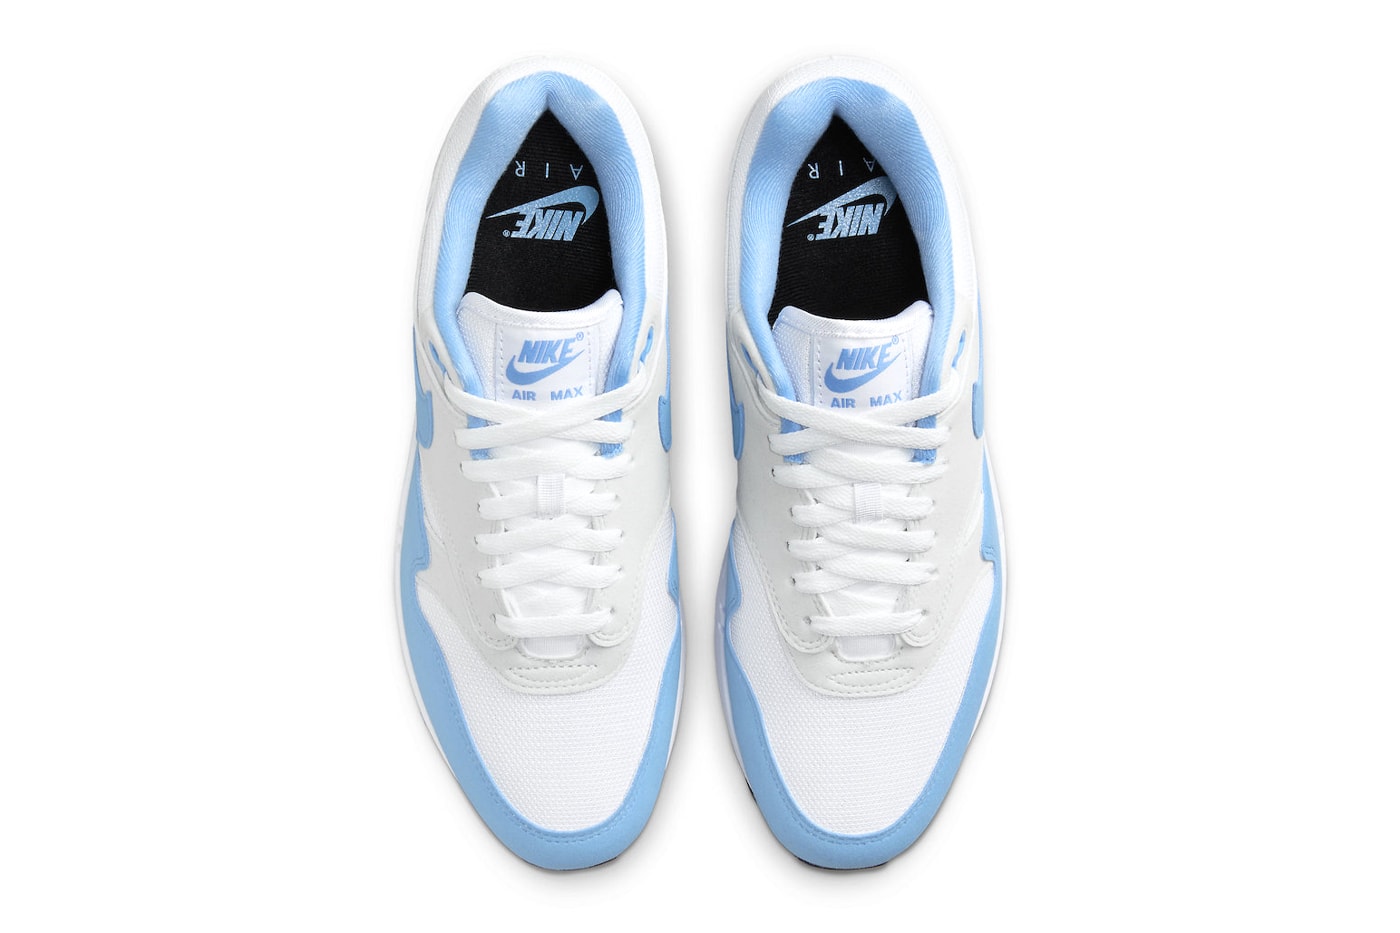 Official Look at the Nike Air Max 1 "University Blue" FD9082-103 White/University Blue-Photon Dust-Black release info november